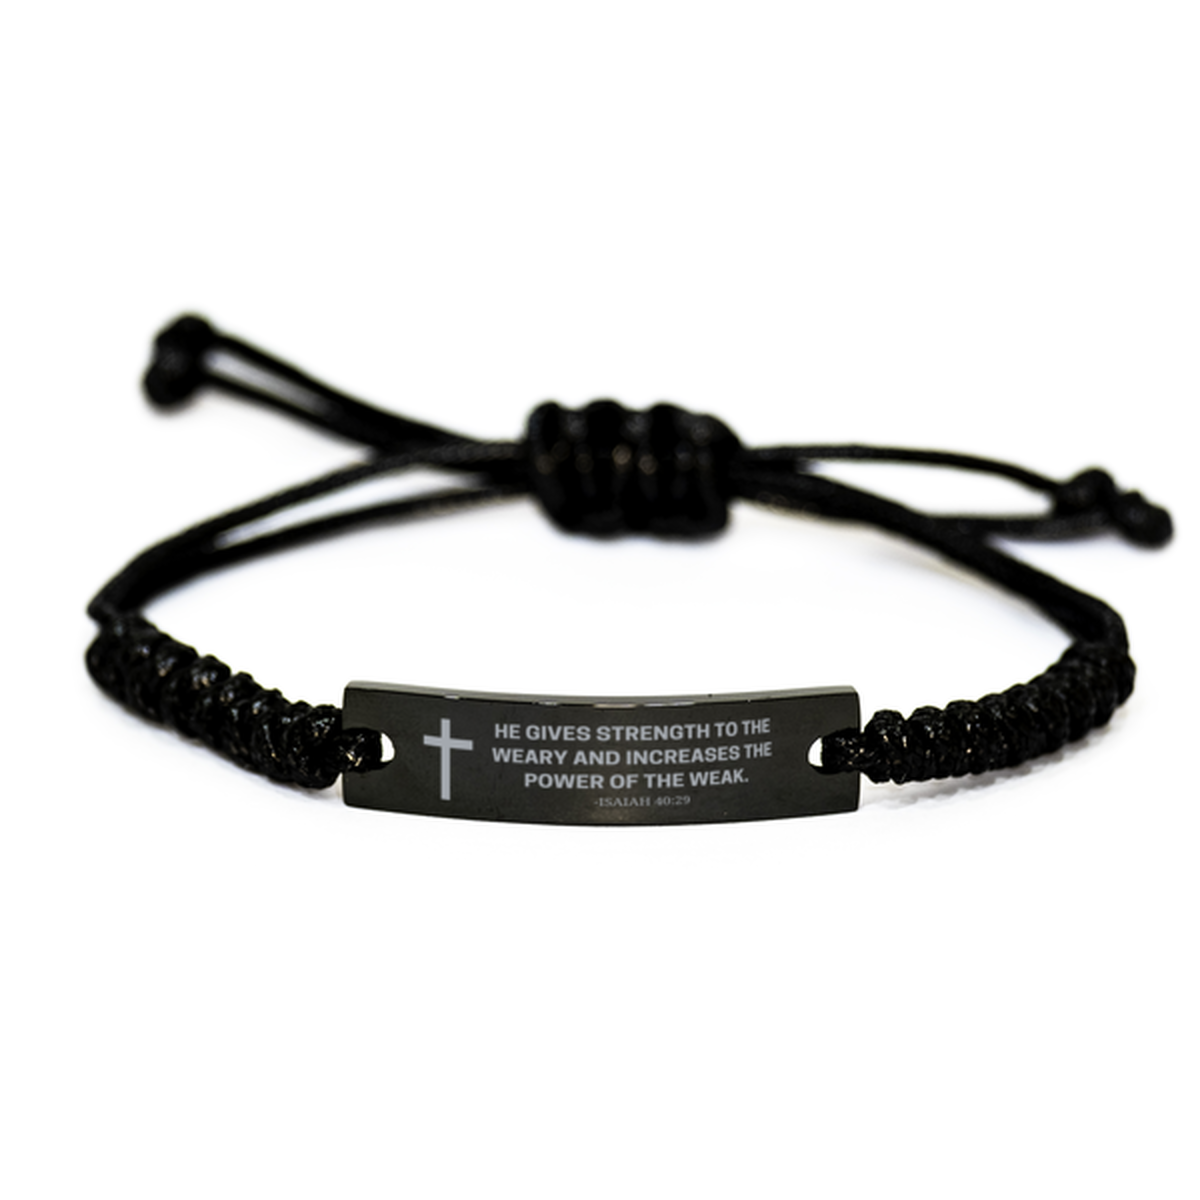 Baptism Gifts For Teenage Boys Girls, Christian Bible Verse Black Rope Bracelet, He gives strength to the weary, Catholic Confirmation Gifts for Son, Godson, Grandson, Nephew